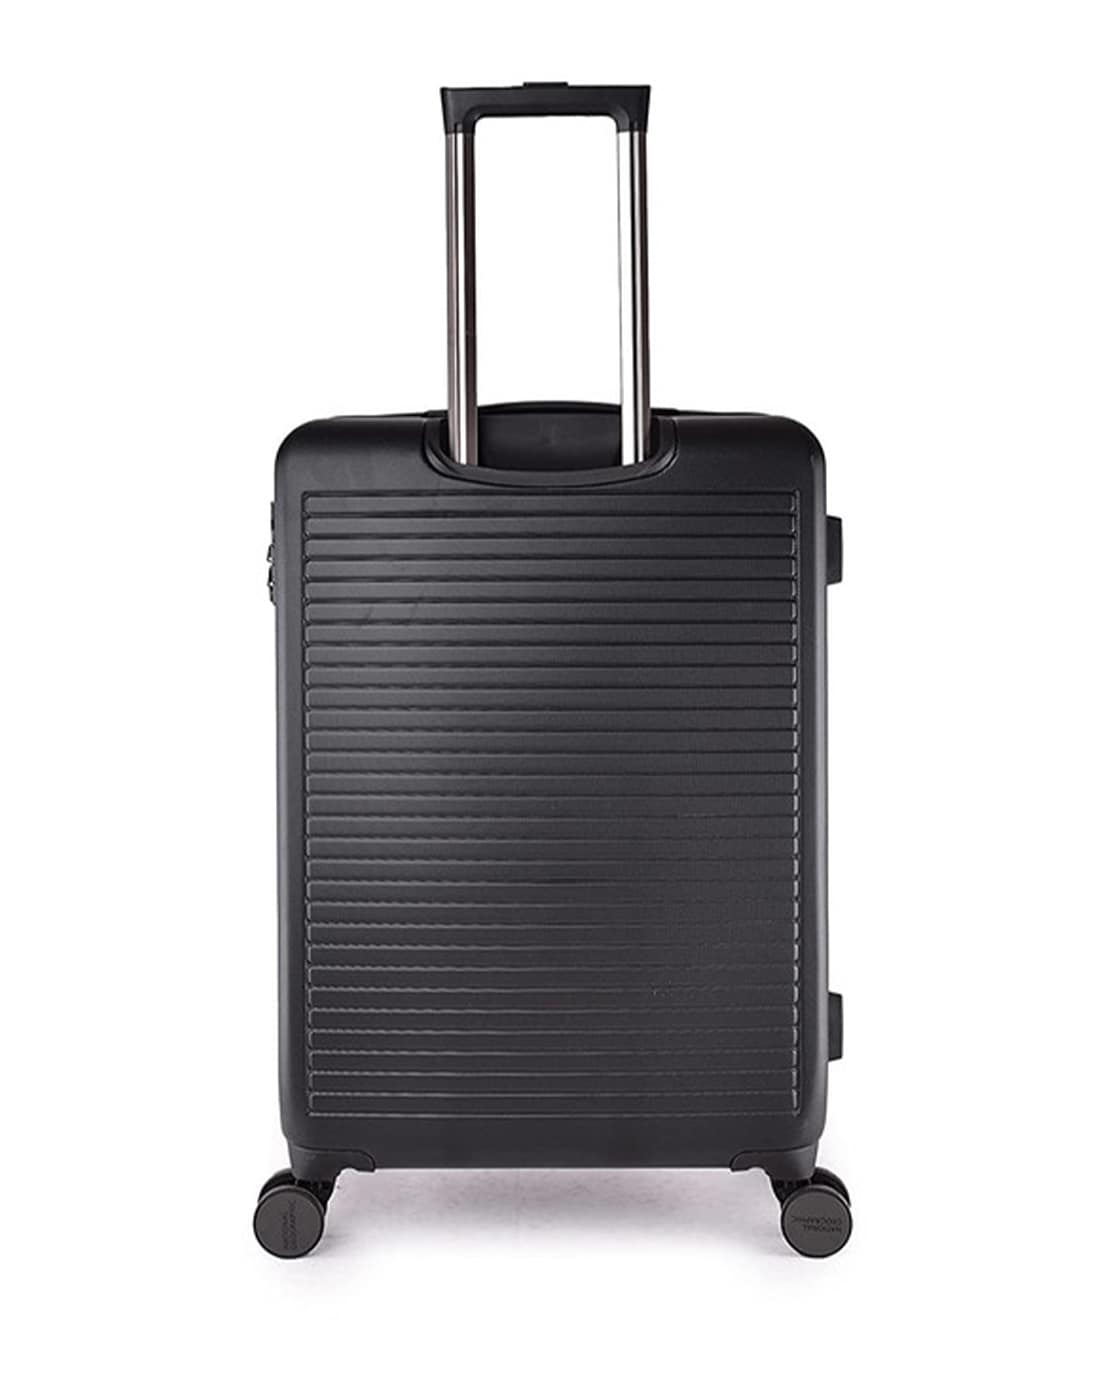 CARRIALL Luggage and Travel Bag  Buy CARRIALL Sleek Small Size Red Cabin  Luggage Bag Online  Nykaa Fashion